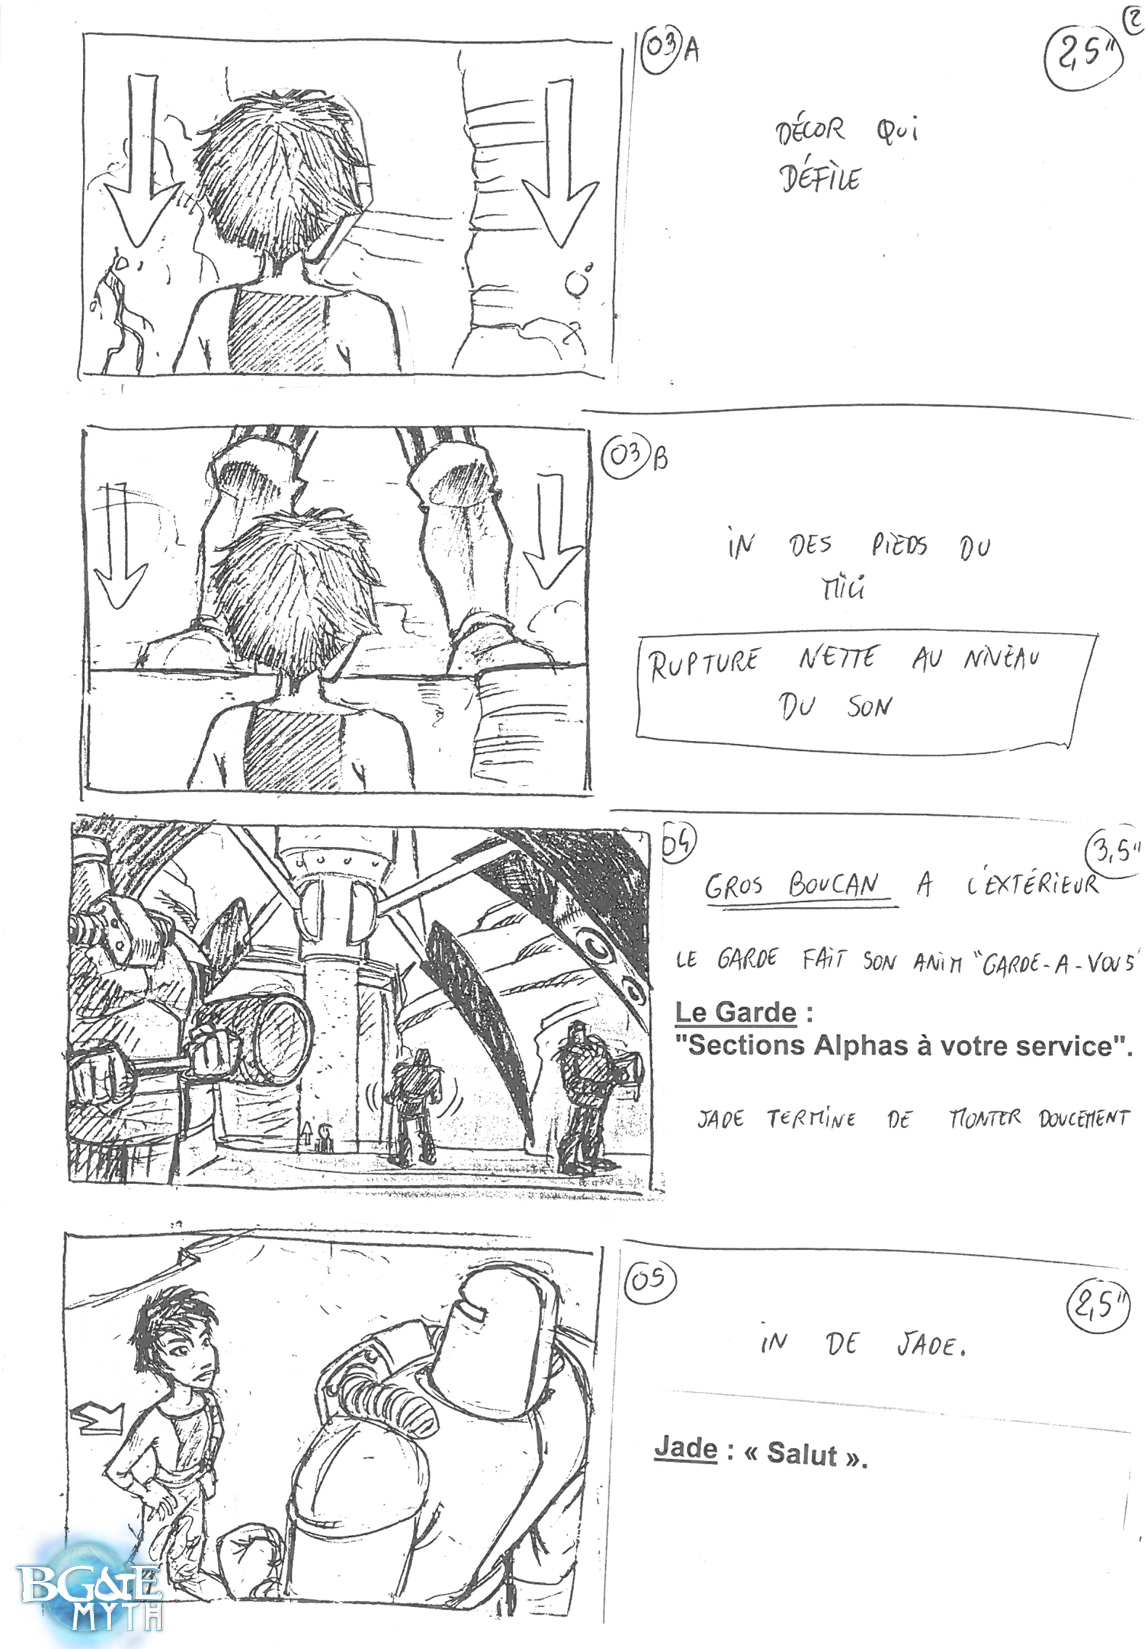 Storyboard : Les sections Alpha débarquent ! - Page 2